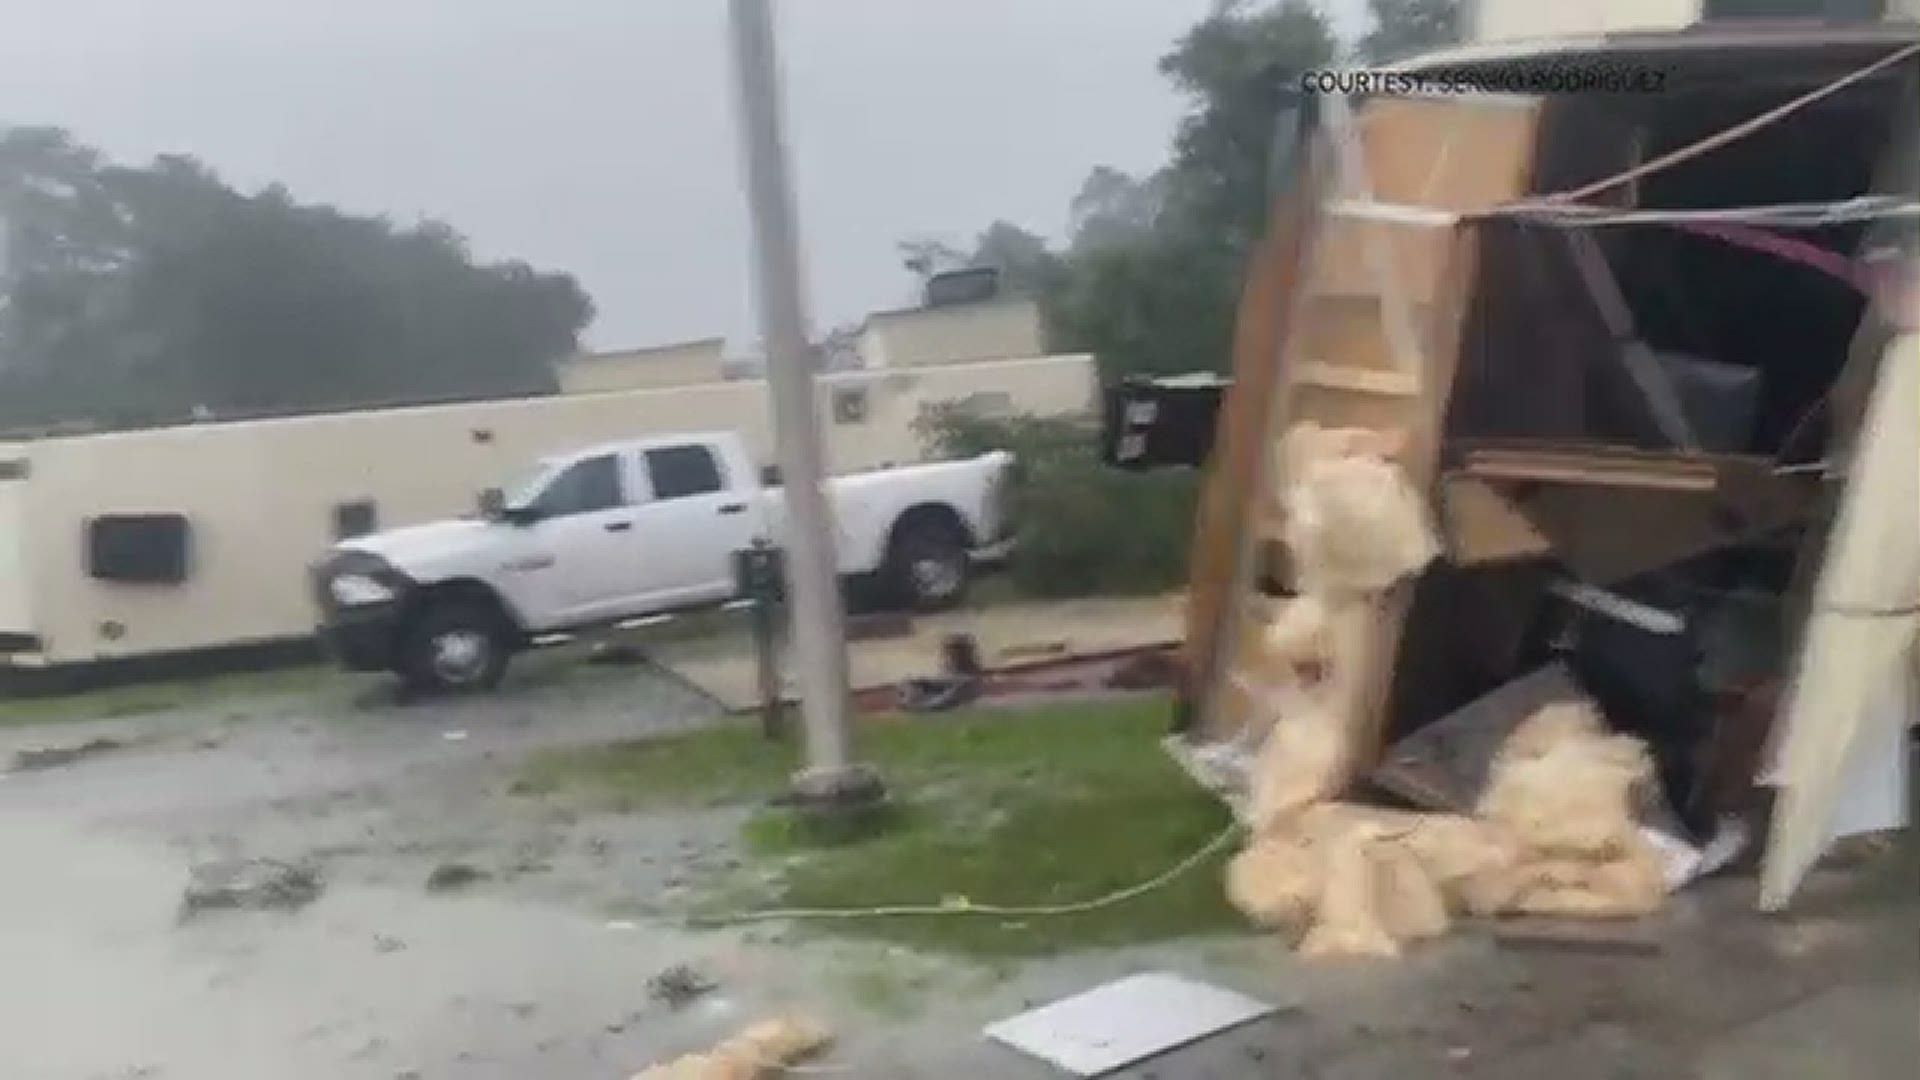 Sergio Rodriquez posted video on social media of the damage following a tornado warning.